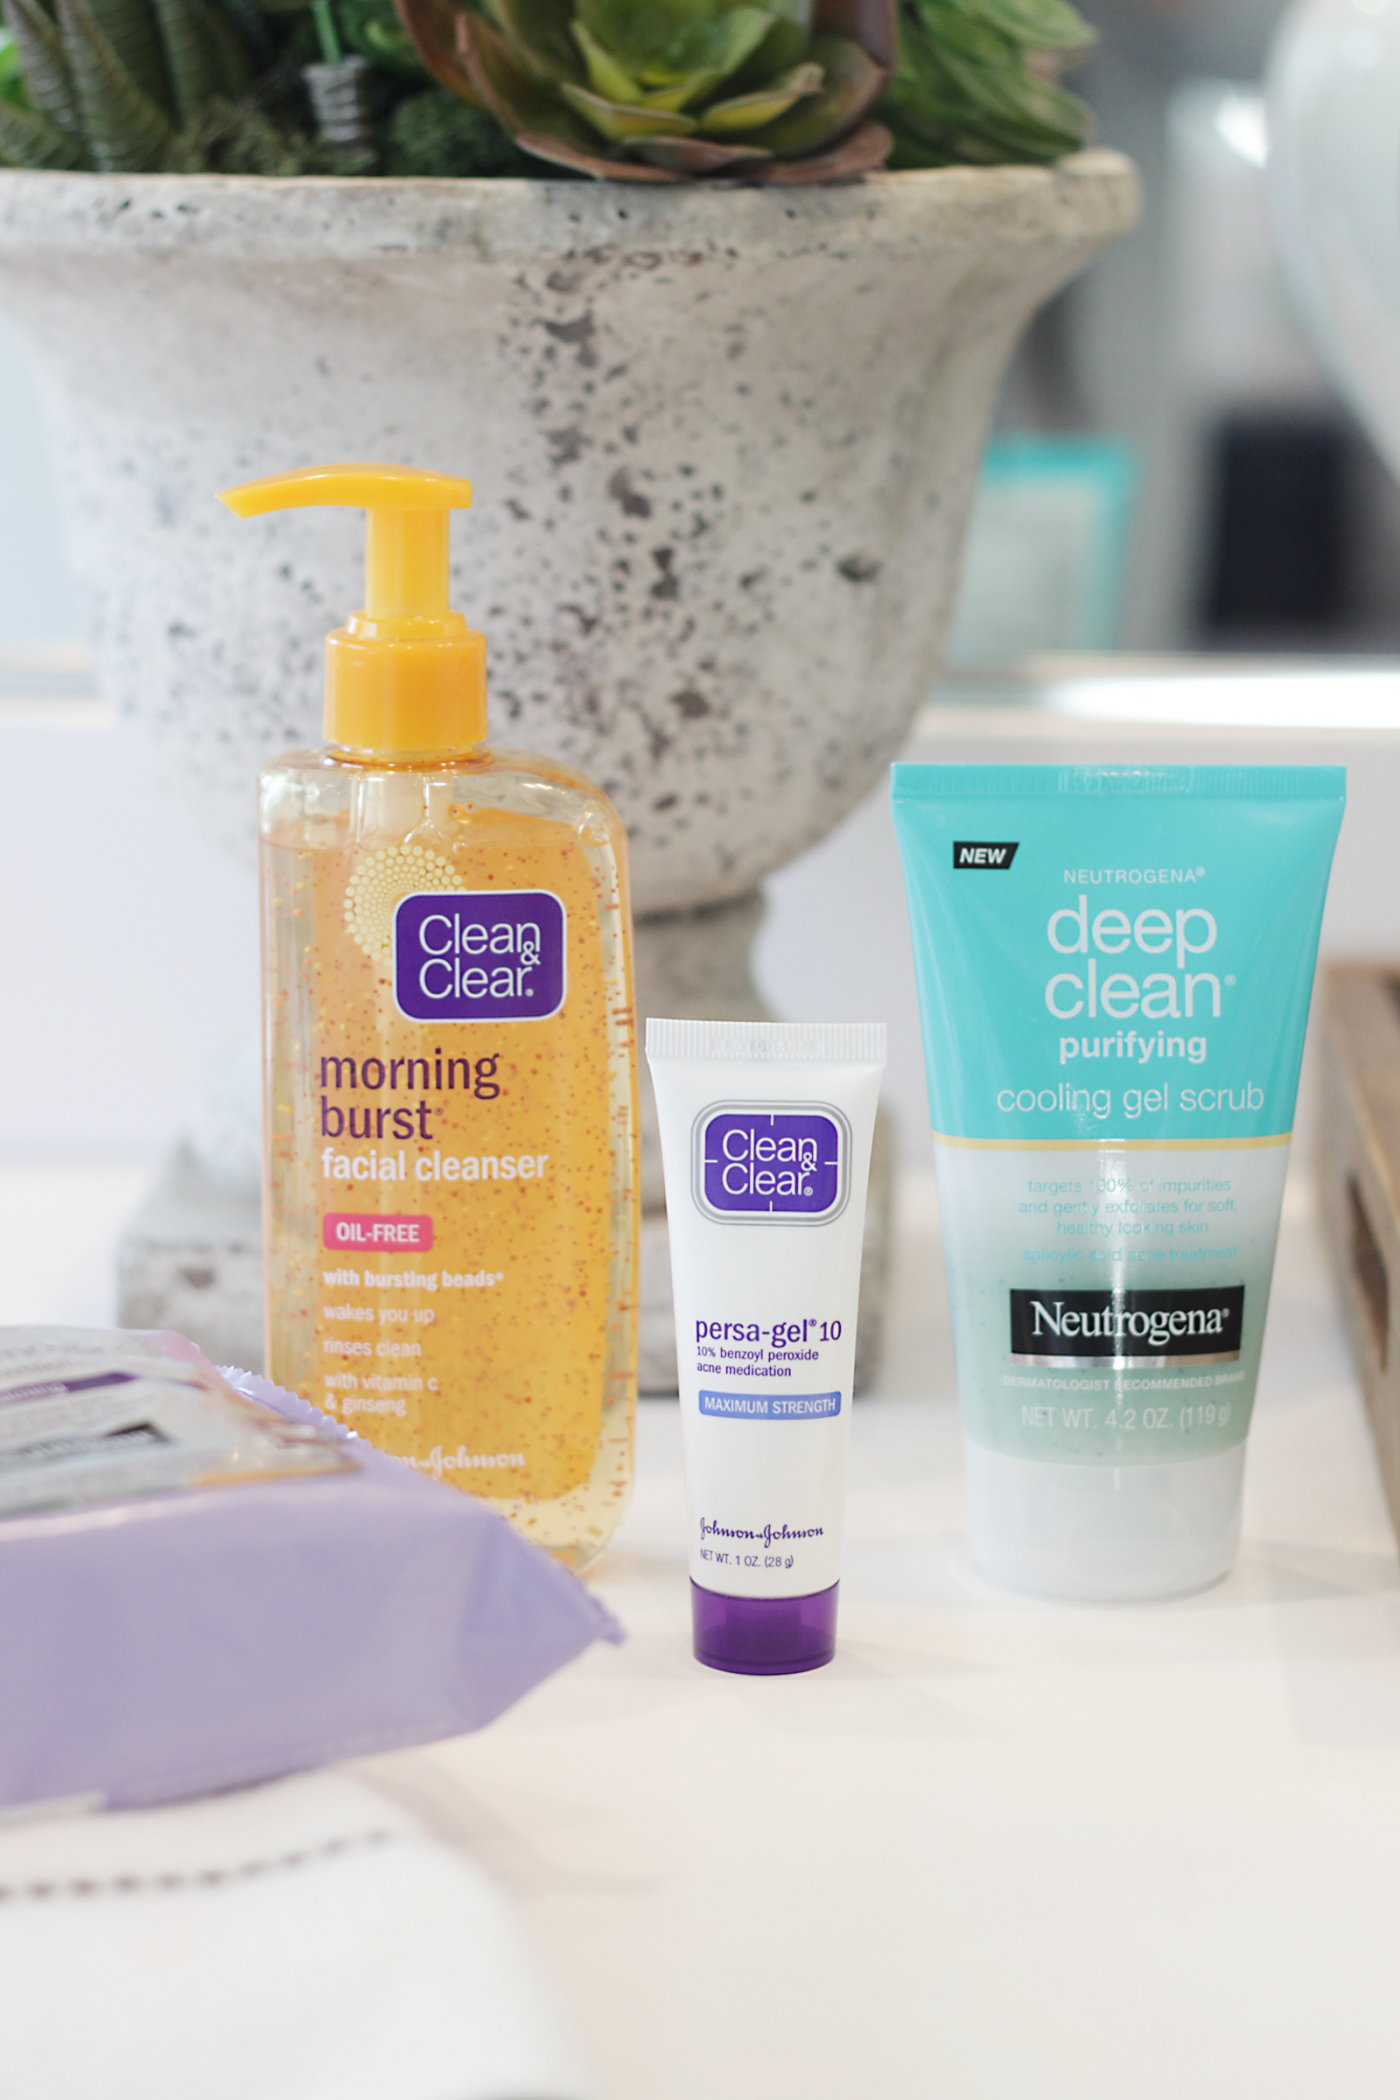 Breakouts SUCK! Time to say goodbye to pesky breakouts and hello to glowing skin. Makeup Life and Love is sharing an EASY 3 Step Nighttime Acne Routine that is perfect for all ages.